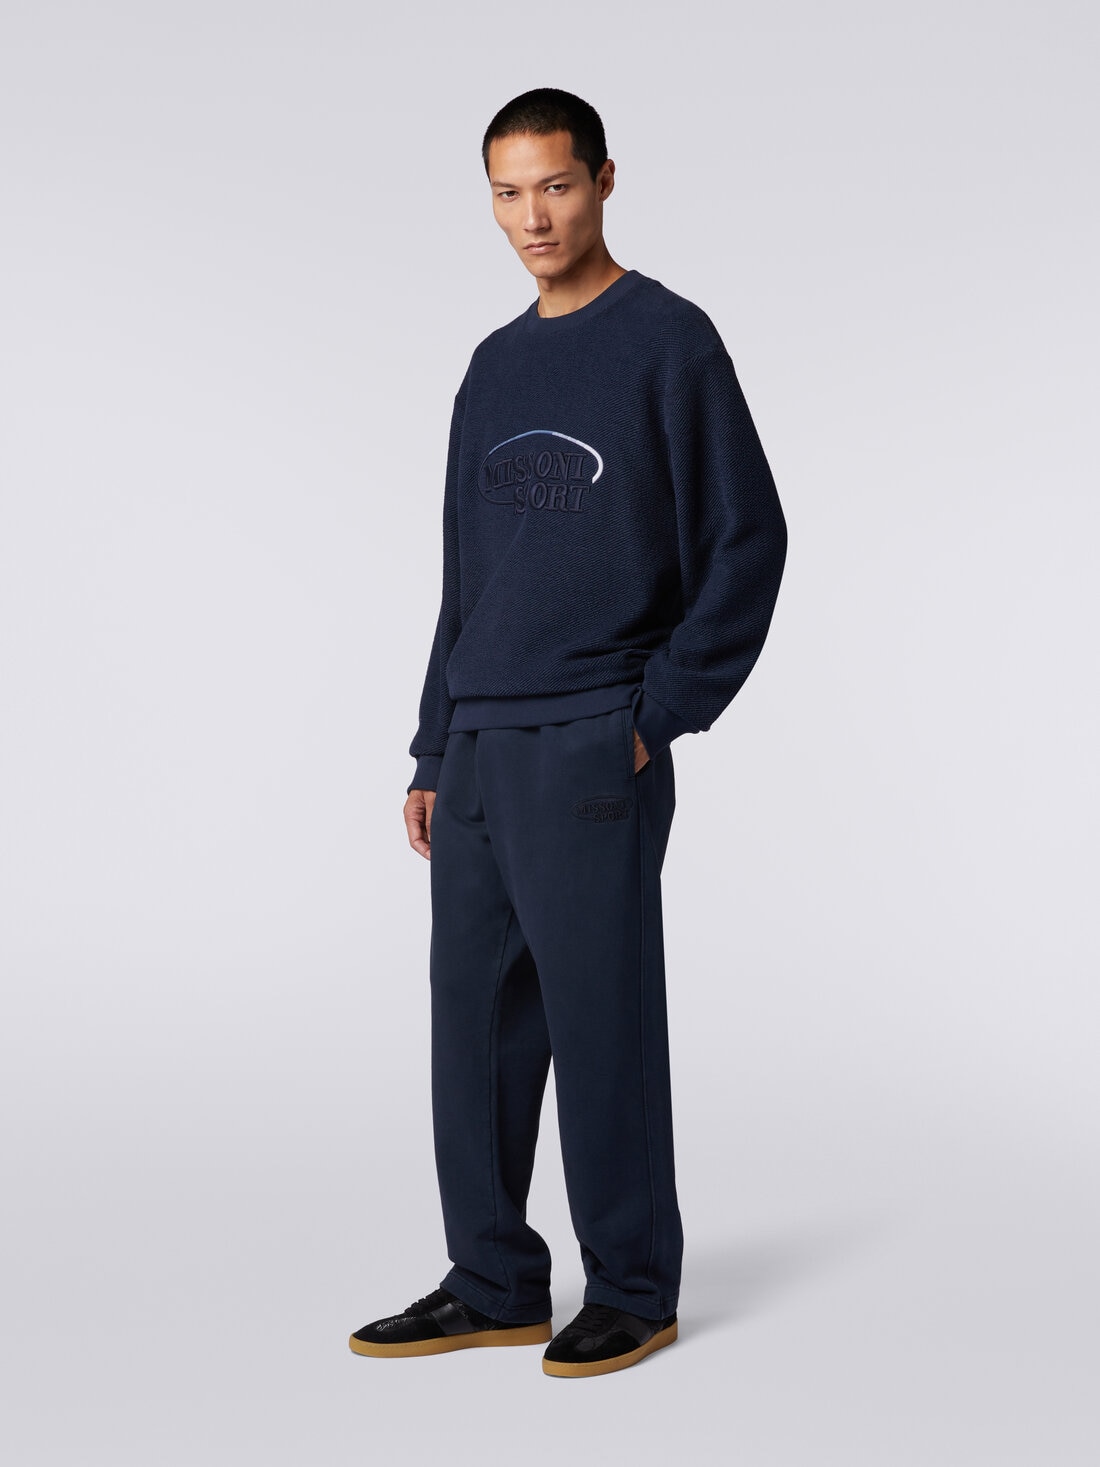 Crew-neck sweatshirt in brushed cotton with large embroidered logo, Navy Blue  - TS24SW07BJ00IPS72EU - 2